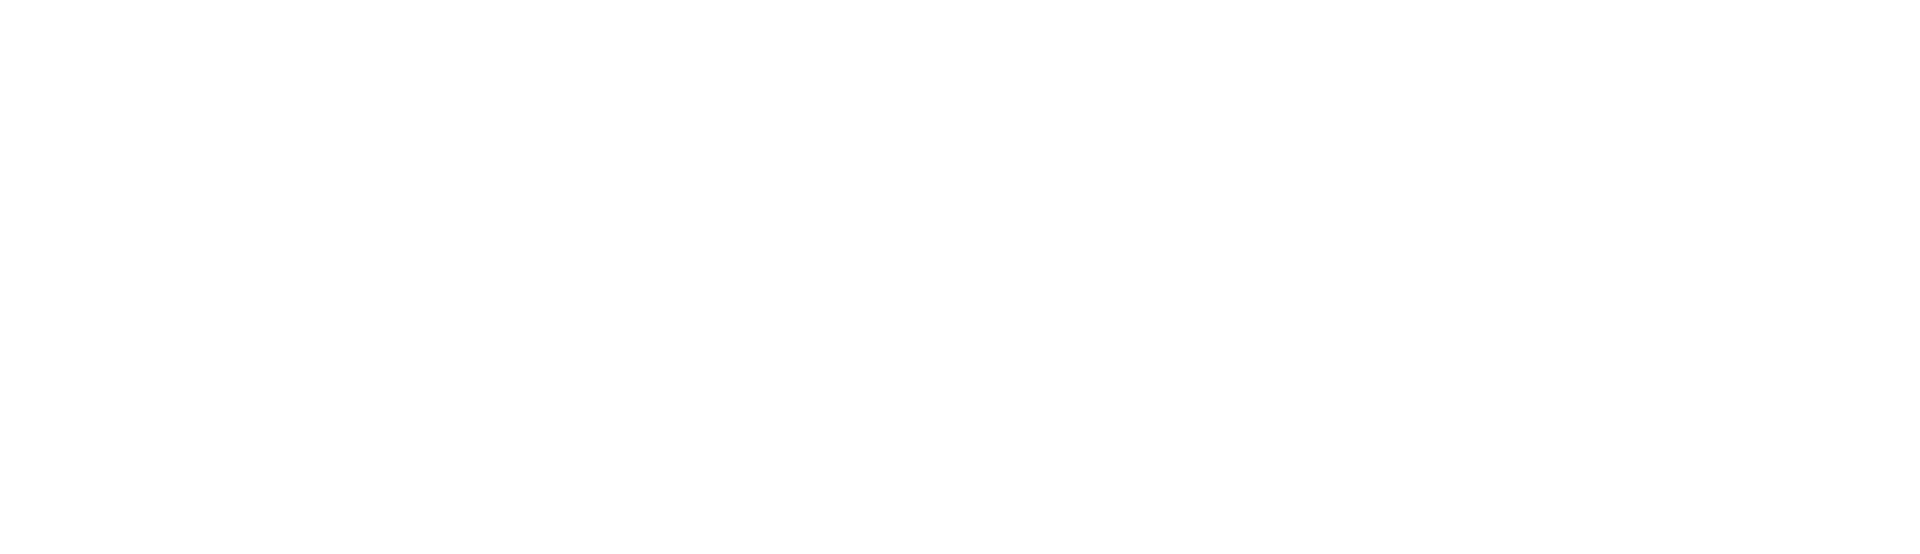 Stores Industrie Services